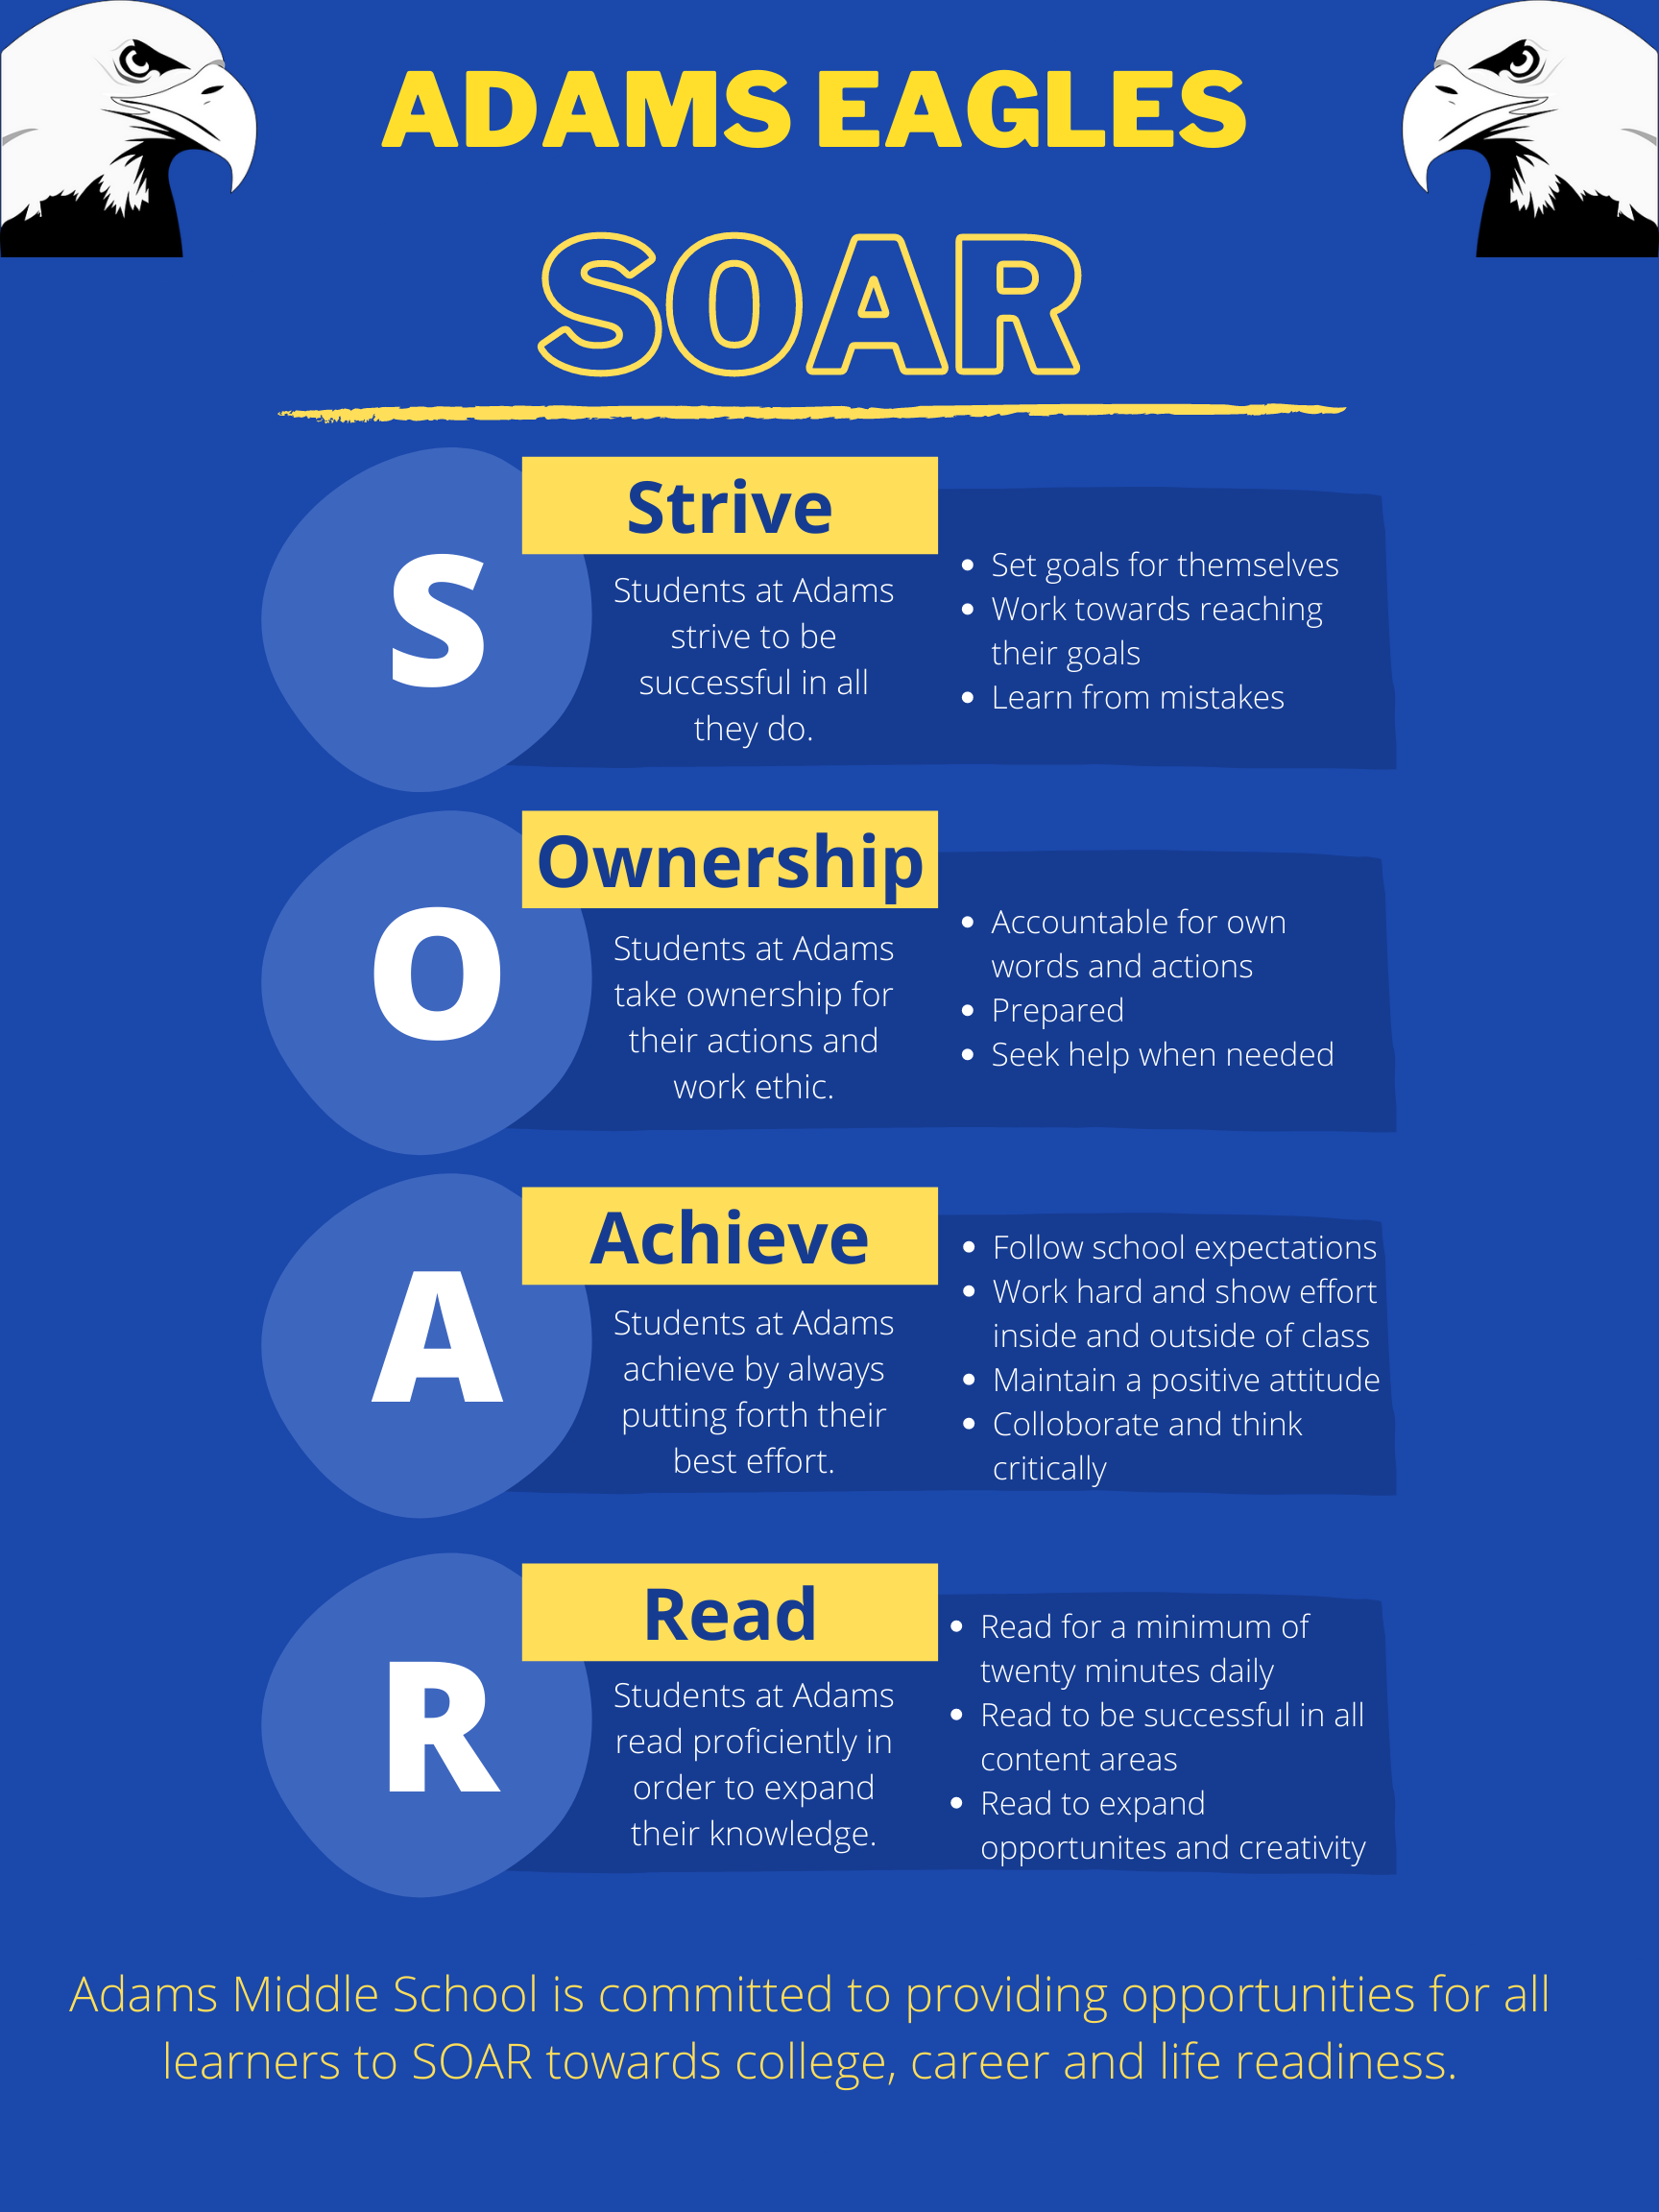 Mission Statement S.O.A.R. : Strive Ownership Achieve Read  Strive : Students at Adams strive to be successful in all they do.  Set goals for themselves Work towards reaching their goals Learn from mistakes Ownership : Students at Adams take ownership for their actions and work ethic.  Accountable for own words and actions Prepared Seek help when needed Achieve : Students at Adams achieve by always putting forth their best effort.  Follow school expectations Work hard and show effort inside and outside of class Maintain a positive attitude  Collaborate and think critically Read : Students at Adams read proficiently in order to expand their knowledge.  Read for a minimum of twenty minutes daily Read to be successful in all content areas Read to expand opportunities and creativity Adams Middle School is committed to providing opportunities for all learners to SOAR towards college, career and life readiness. 